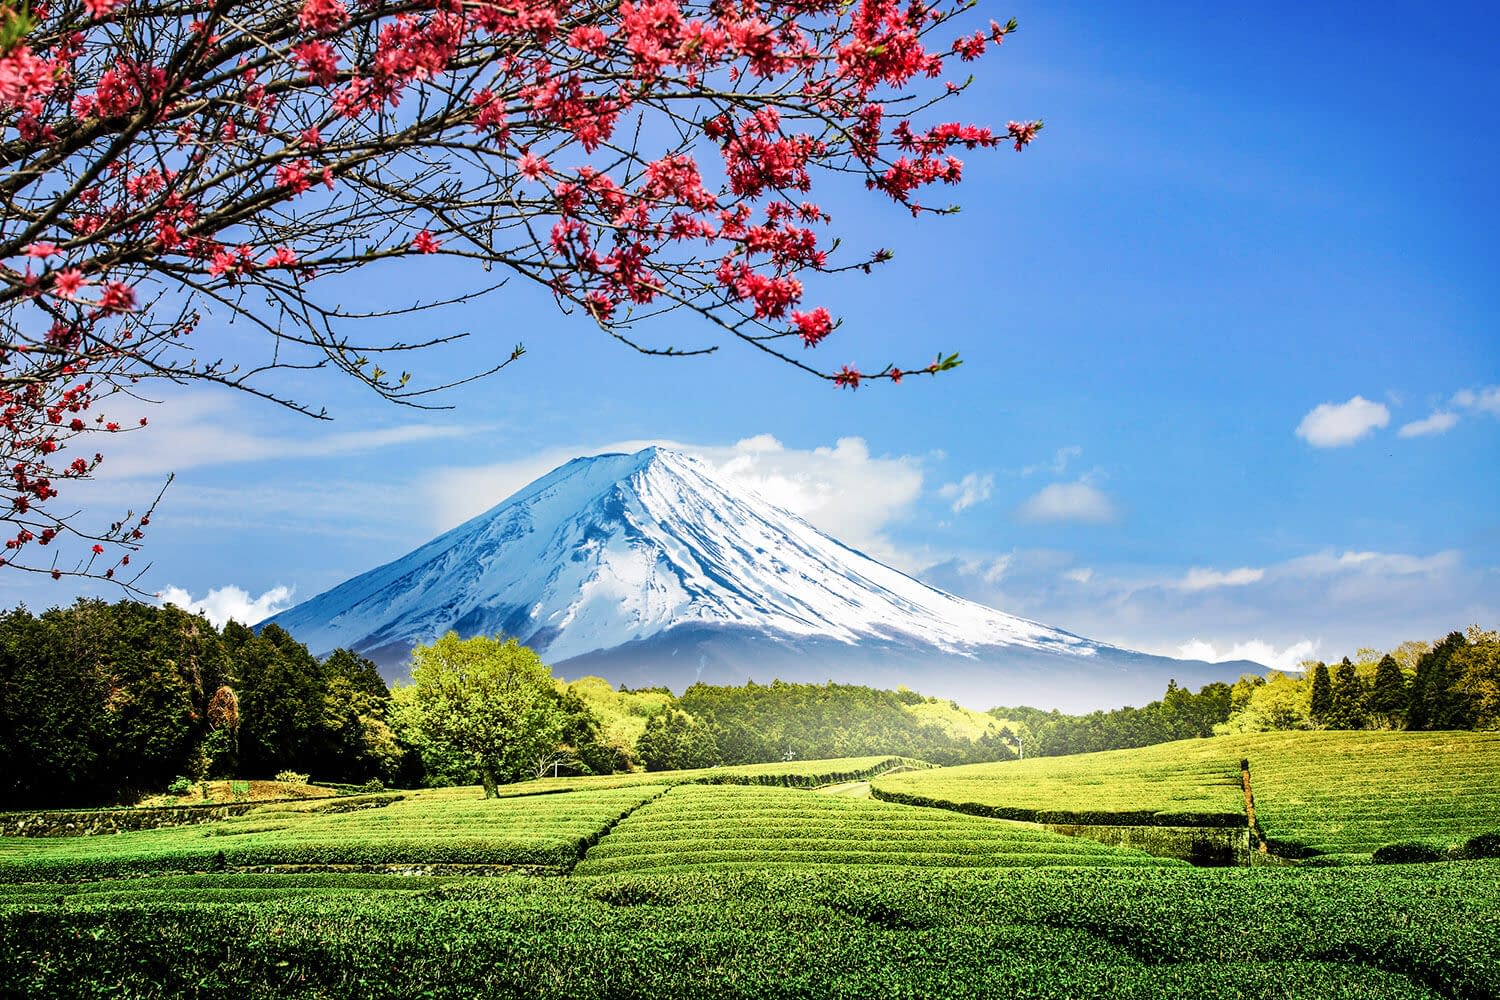 Mt. Fuji with beautiful green fields in the foreground